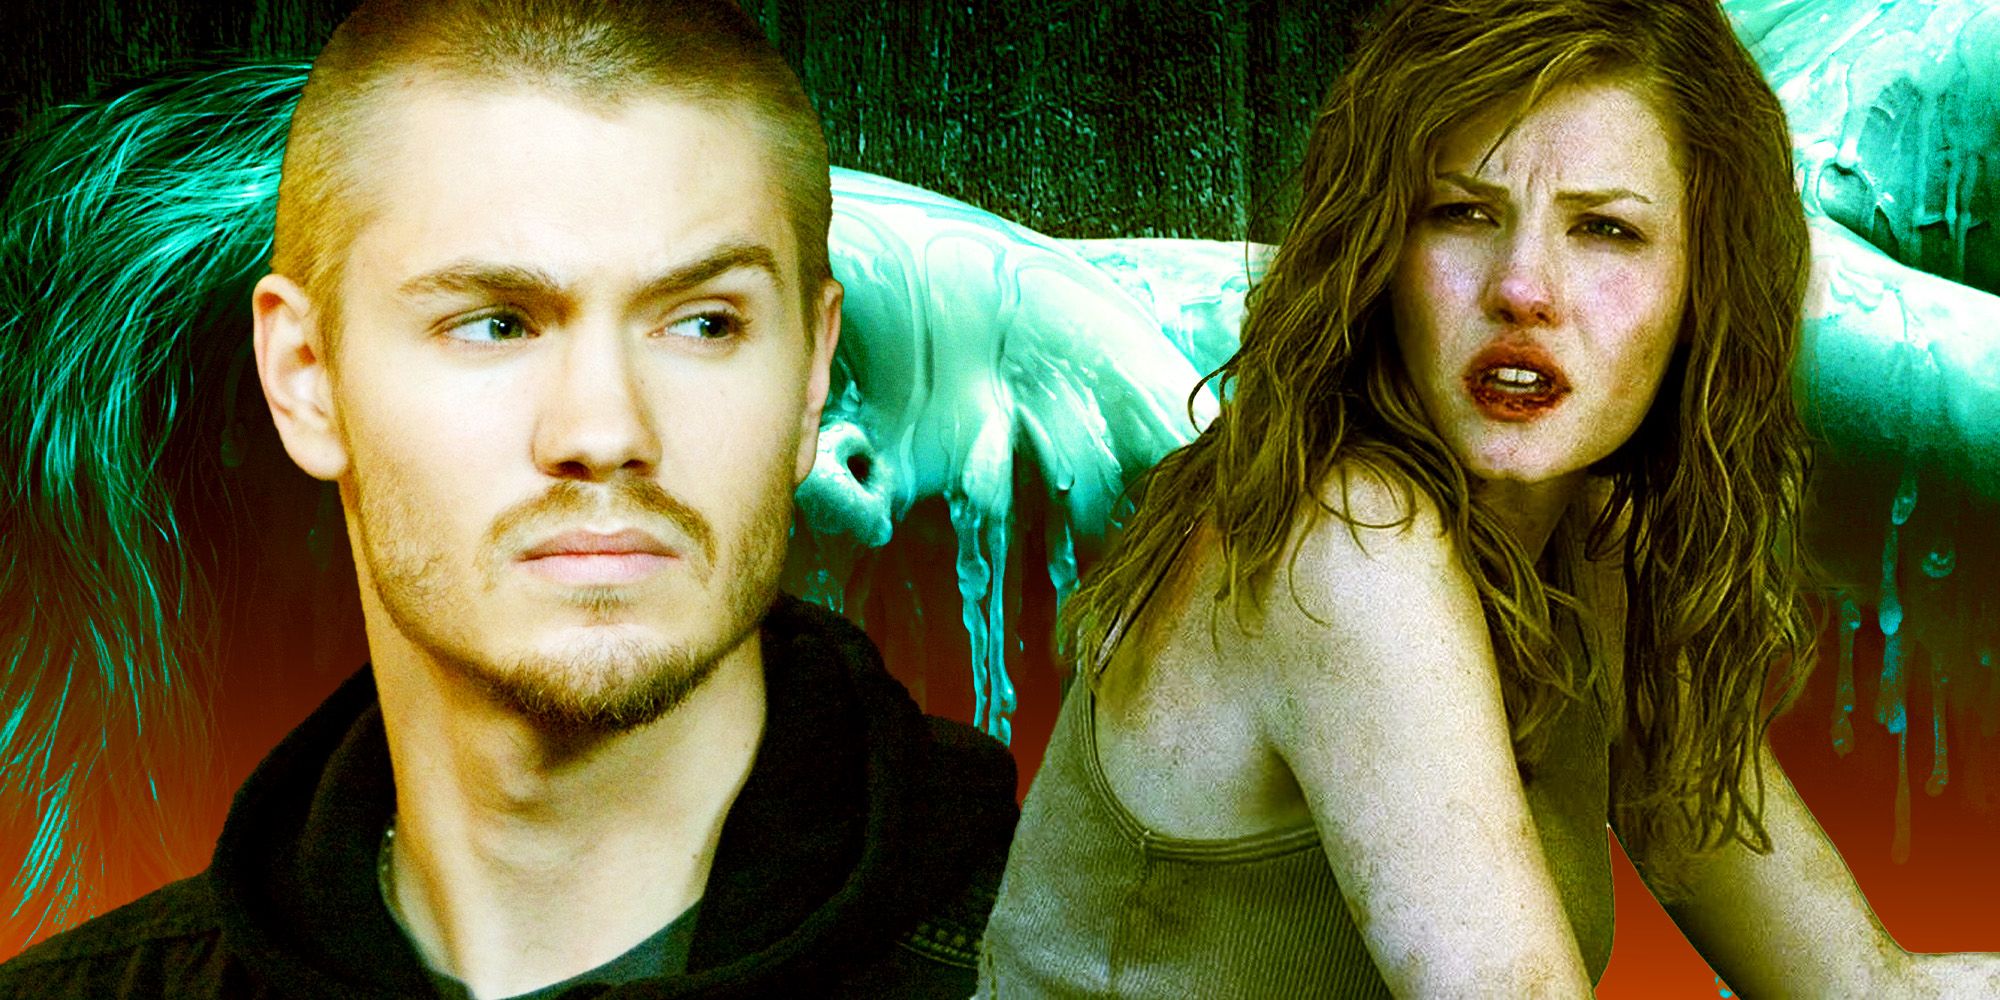 Who Was The Killer In House Of Wax? Identity & Motives Explained